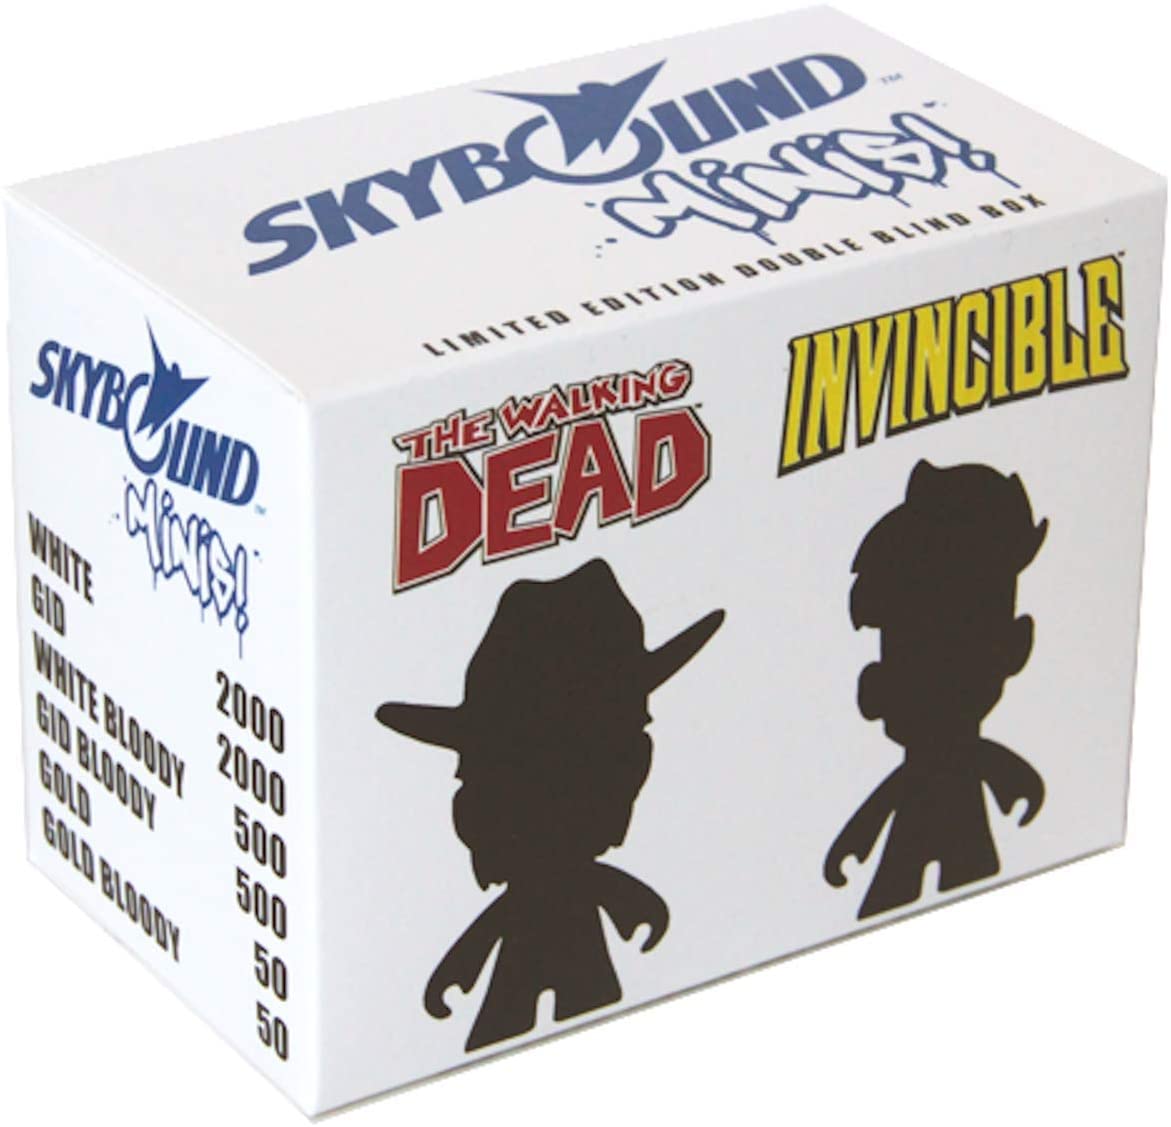 Skybound Minis Limited Edition of 5000 Double Blind Box Set - Rick Grimes The Walking Dead, Invincible from the self titled series - Toptoys2u